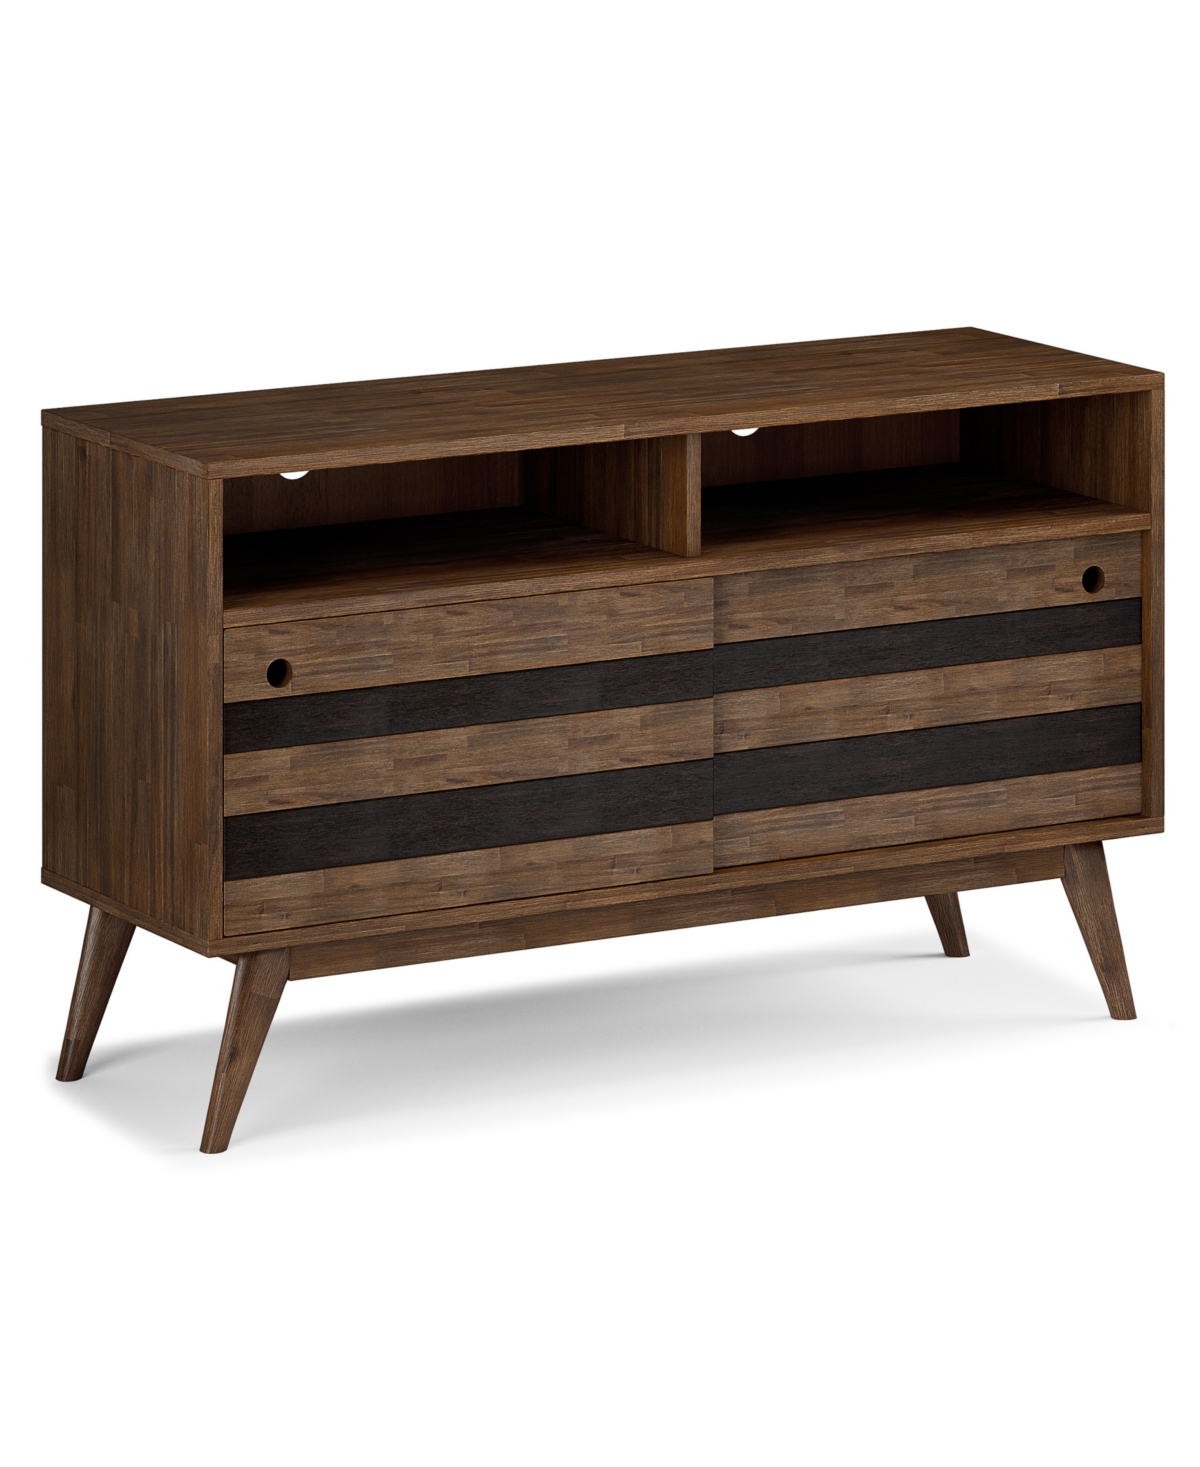 Shop Simpli Home Clarkson Solid Acacia Wood Tv Stand In Rustic Natural Aged Brown For Tvs Up To 60 Inches